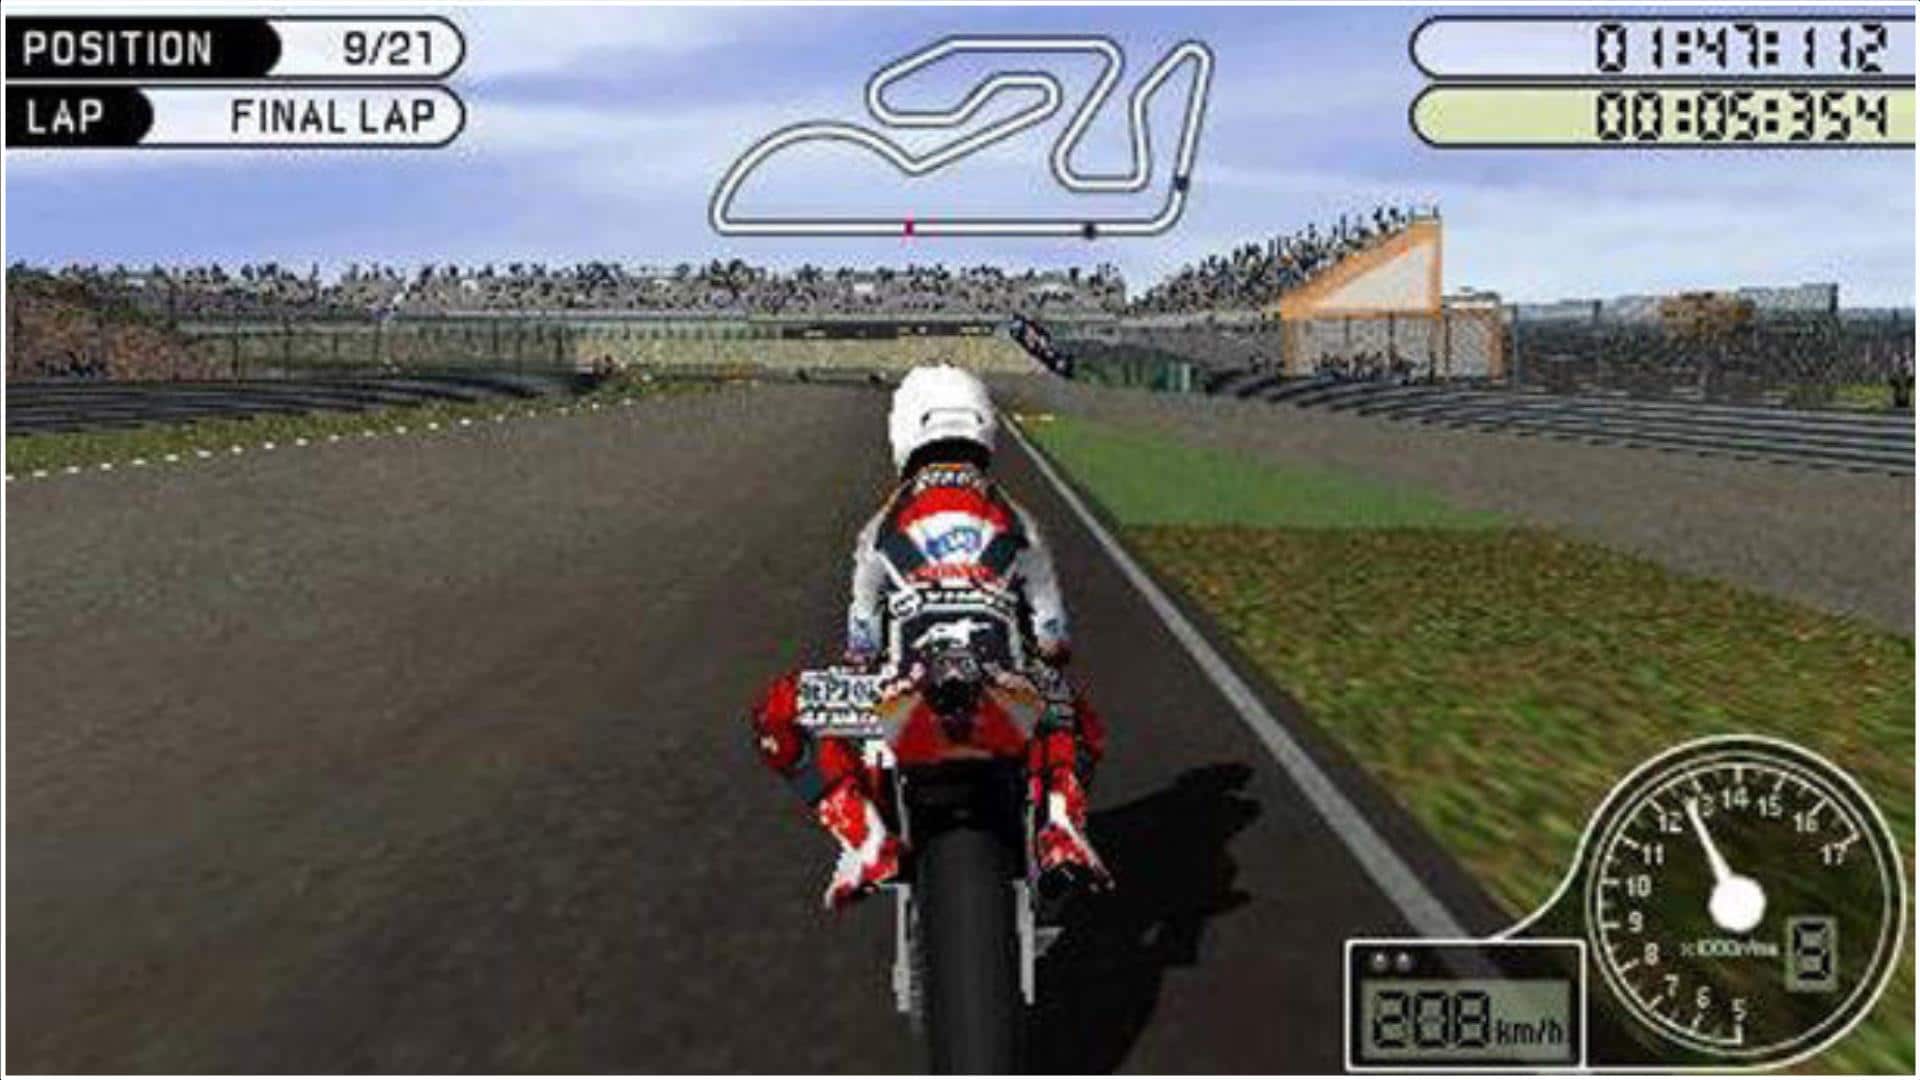 Motogp Highly Compressed Pc Game - Colaboratory